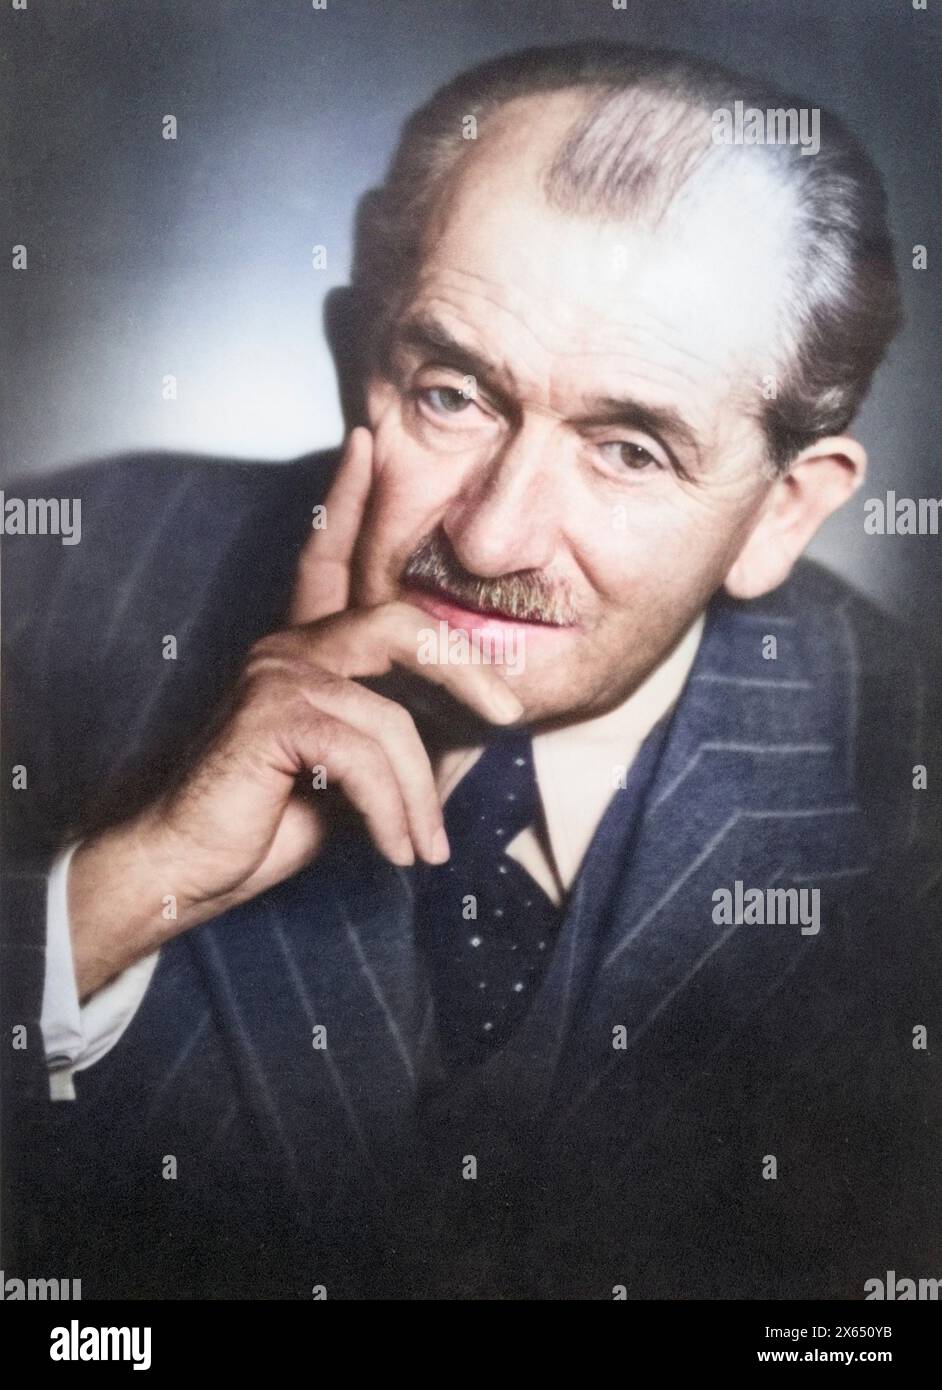 Porsche, Ferdinand, 3.9.1875 - 30.1.1951, German car design engineer, portrait, 1940s, ADDITIONAL-RIGHTS-CLEARANCE-INFO-NOT-AVAILABLE Stock Photo